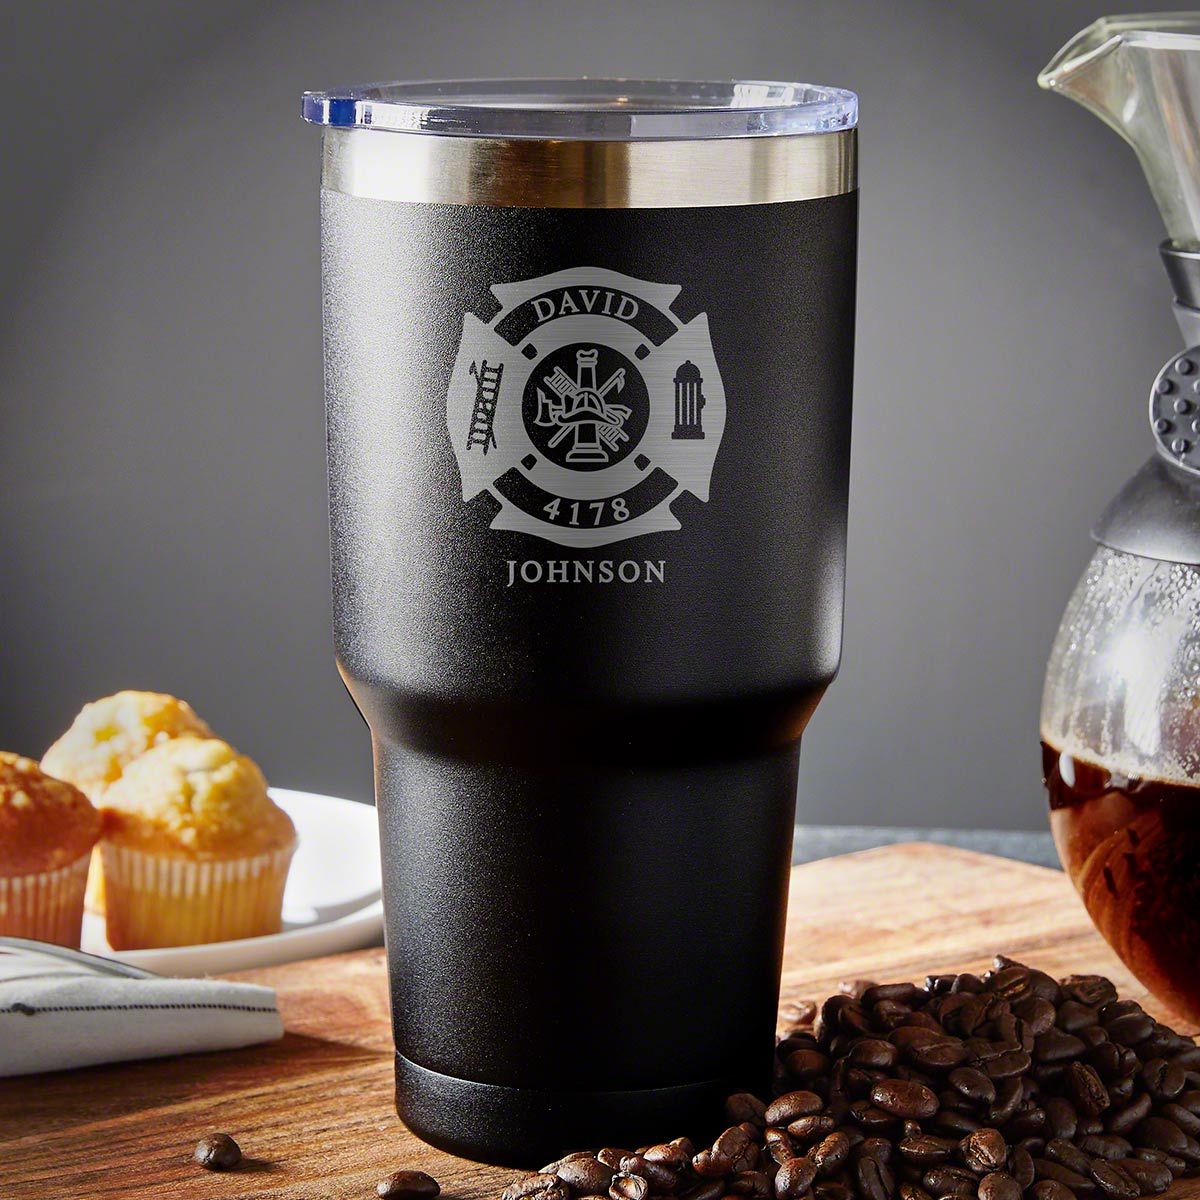 https://images.homewetbar.com/media/catalog/product/f/i/fire-rescue-personalized-travel-cup-for-firefighters-p-6533.jpg?store=default&image-type=image